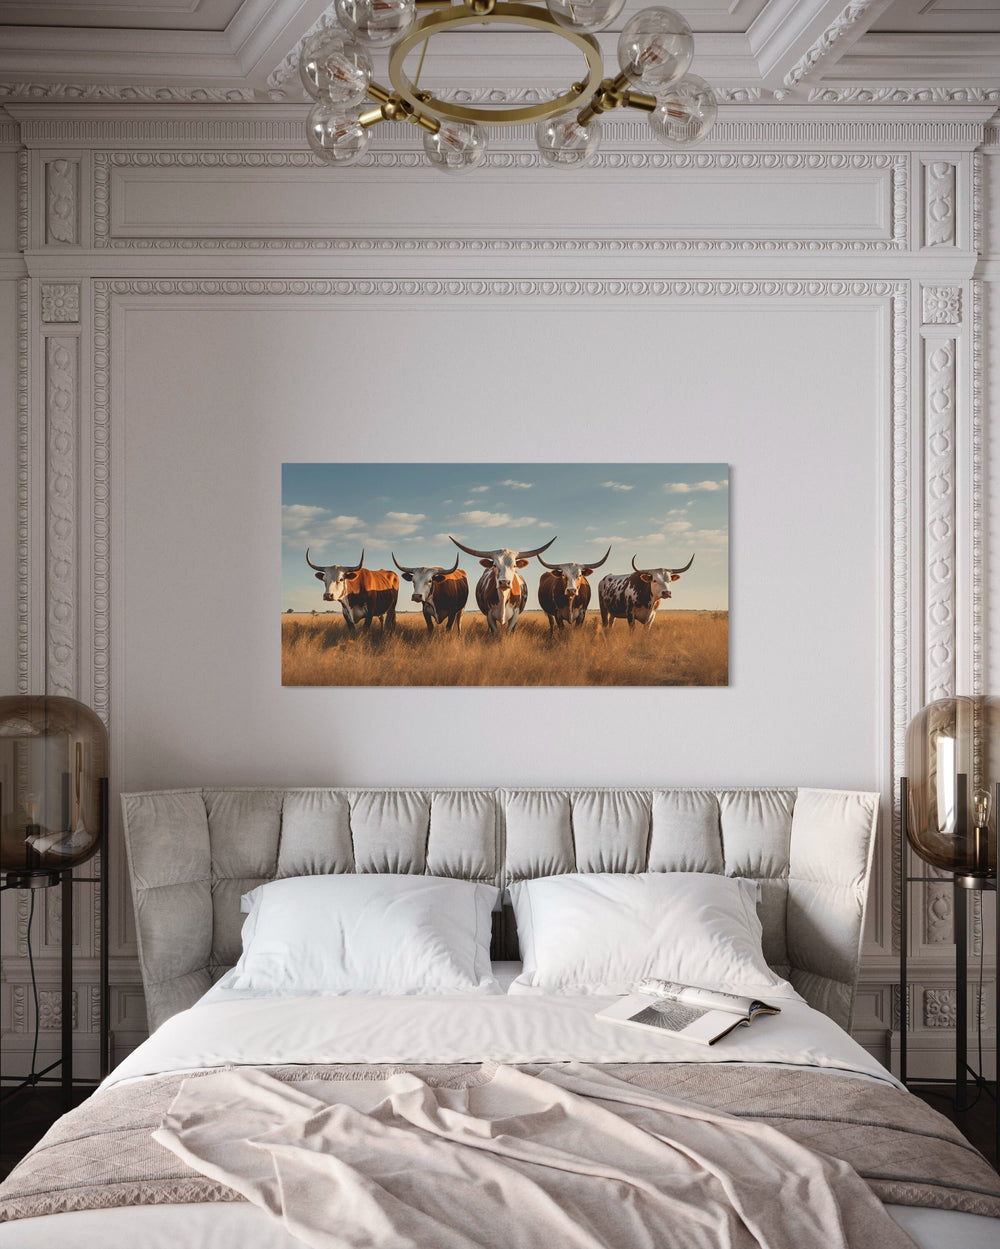 Texas Longhorns Herd In The Field Wall Art "Cattle Gathering" over modern bed